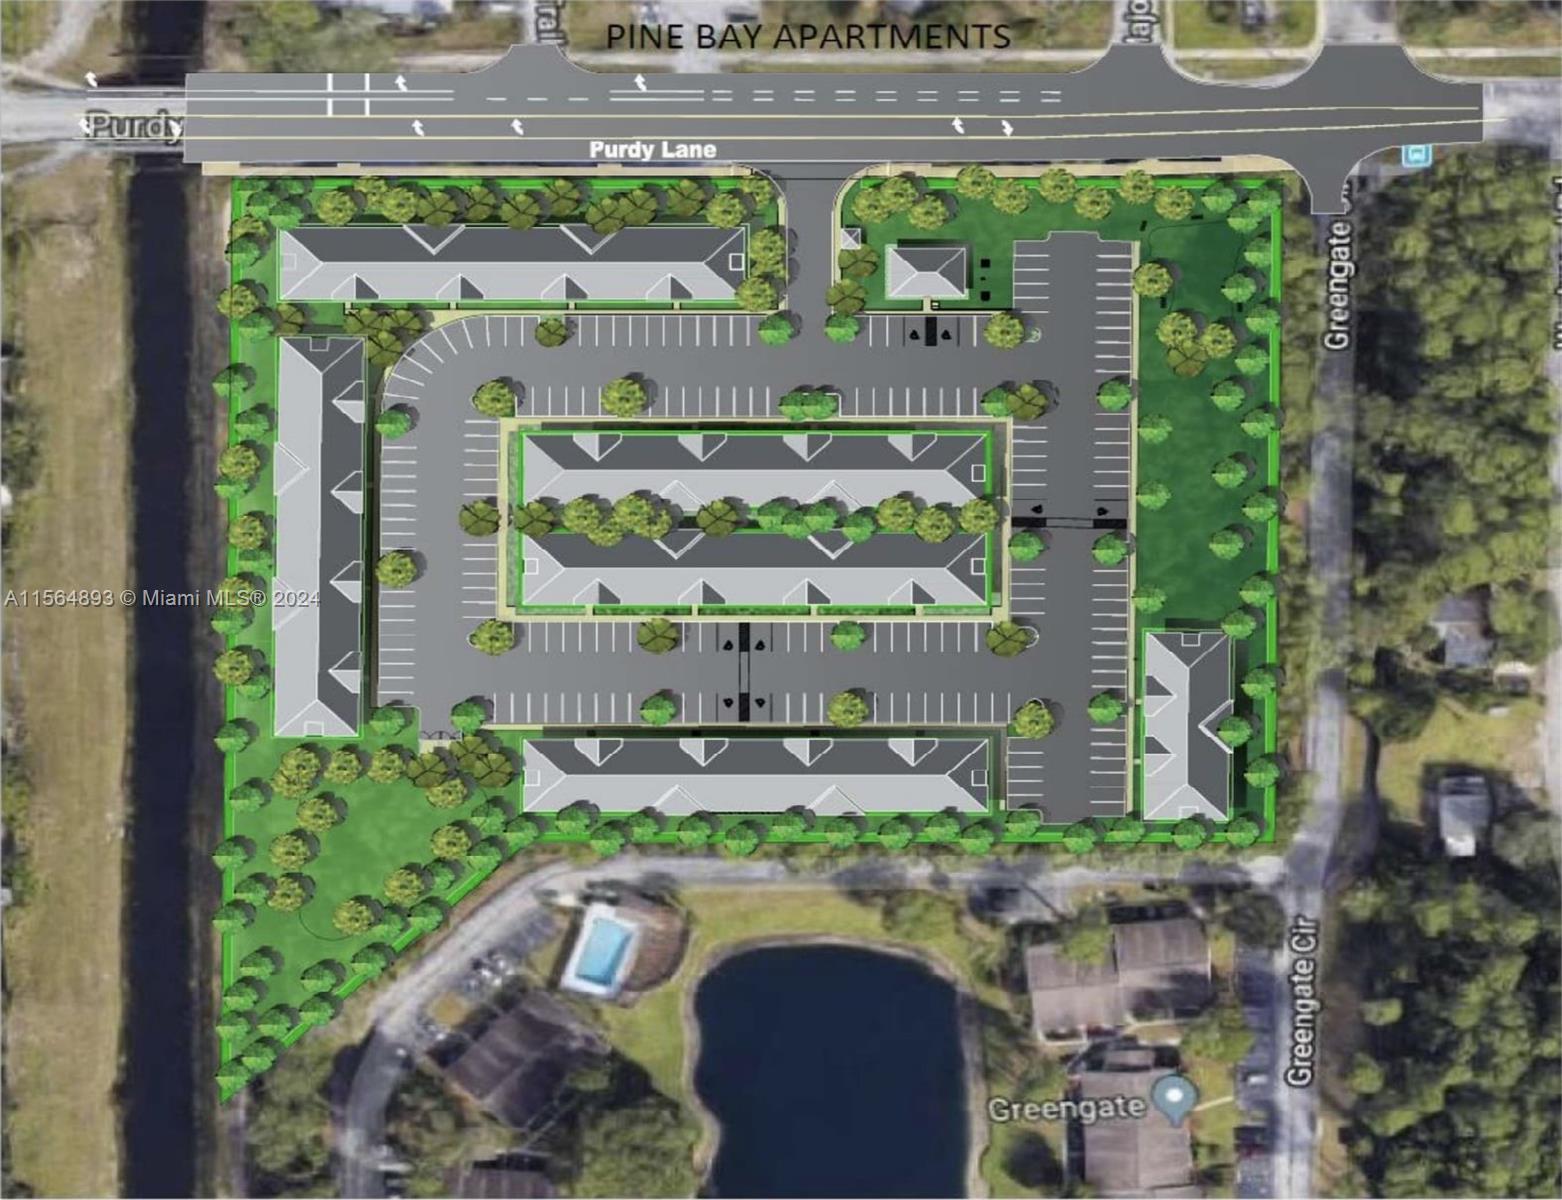 Pine Bay Apartments is a planned multifamily development on a 5.67 acre parcel
located at 5490 Purd